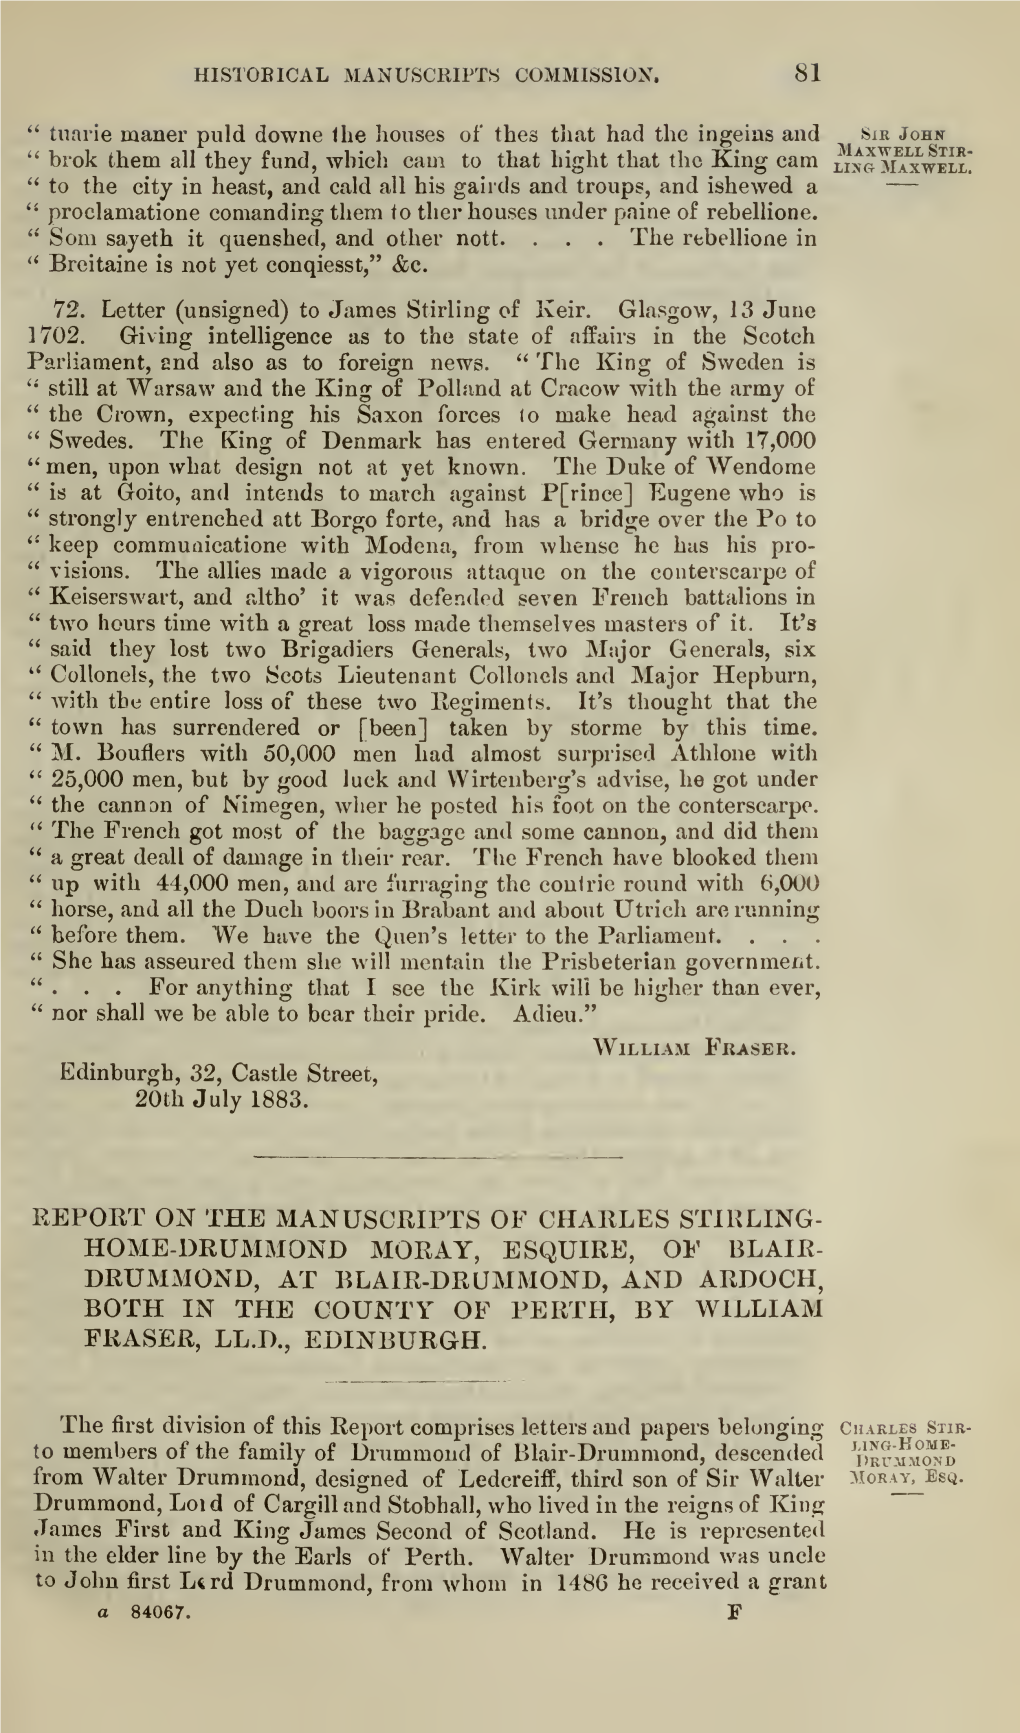 Reports on the Manuscripts of the Earl of Eglinton, Sir J. Stirling Maxwell